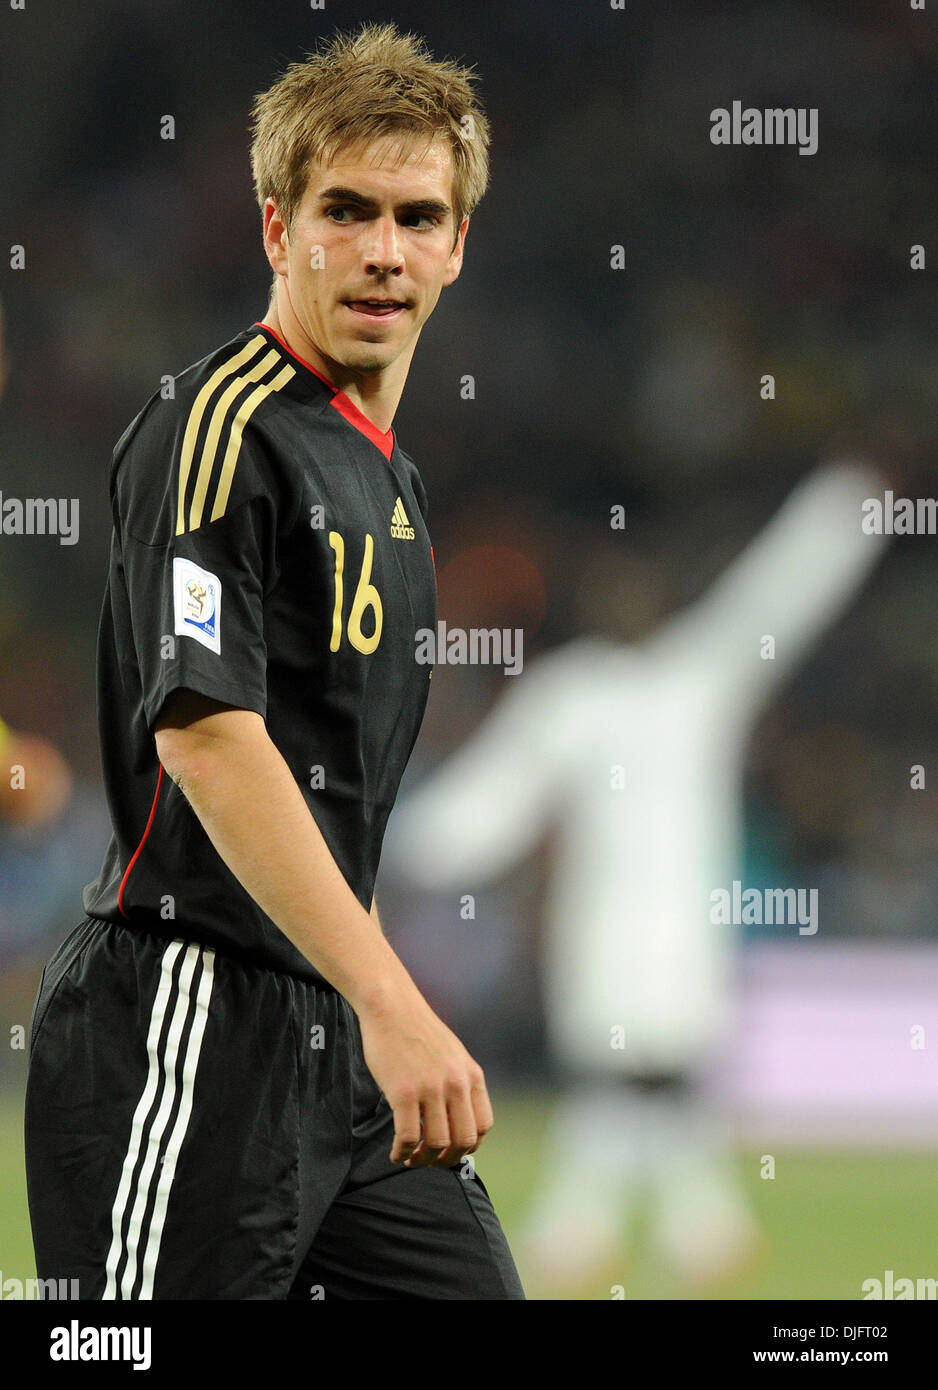 June 23, 2010 - Johannesburg, South Africa - Philipp Lahm of Germany is seen during the 2010 FIFA World Cup soccer match between Ghana and Germany at Soccer City Stadium on June 23, 2010 in Johannesburg, South Africa. (Credit Image: © Luca Ghidoni/ZUMApress.com) Stock Photo